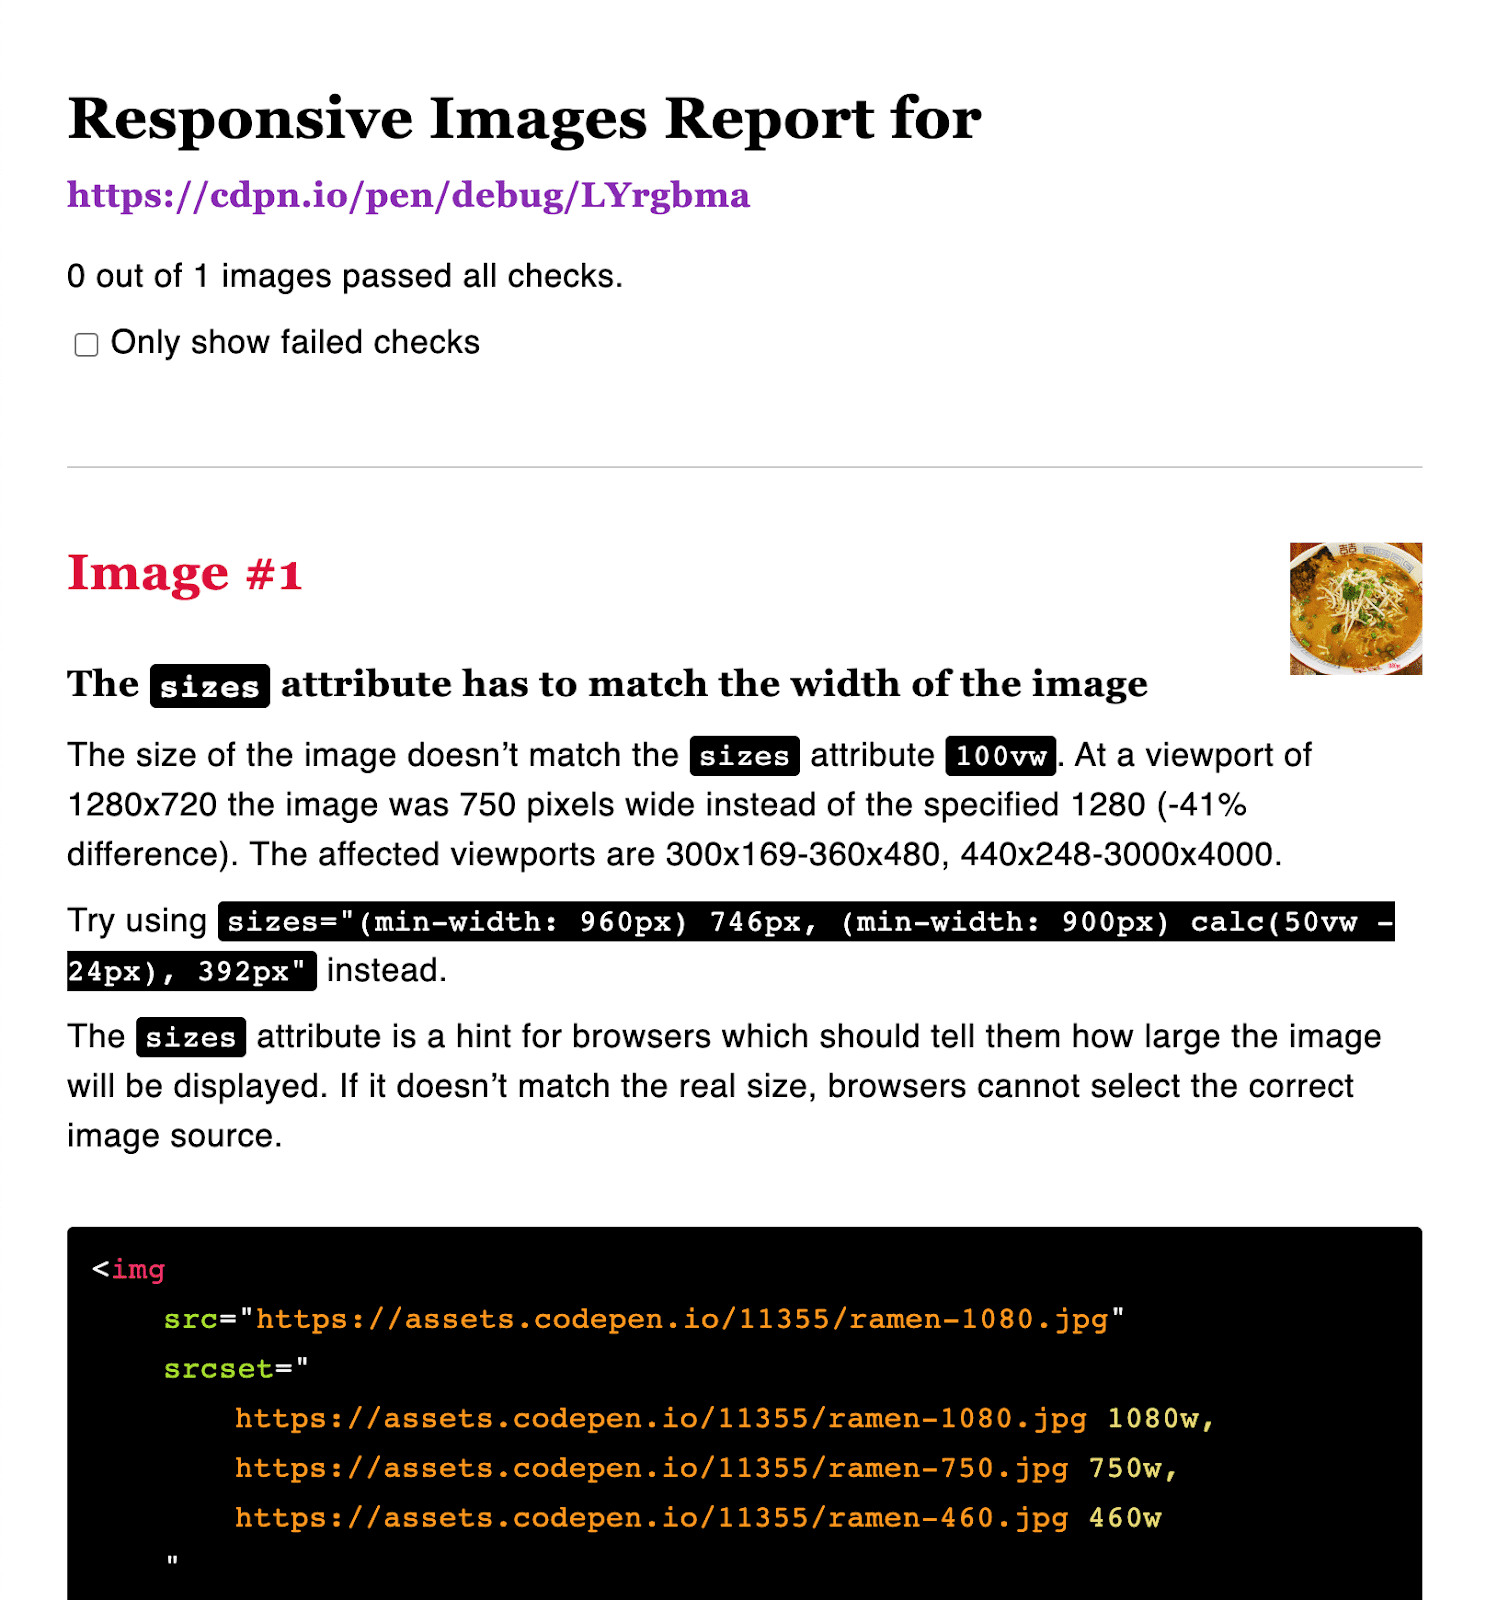 Responsive image report with suggested dimensions.